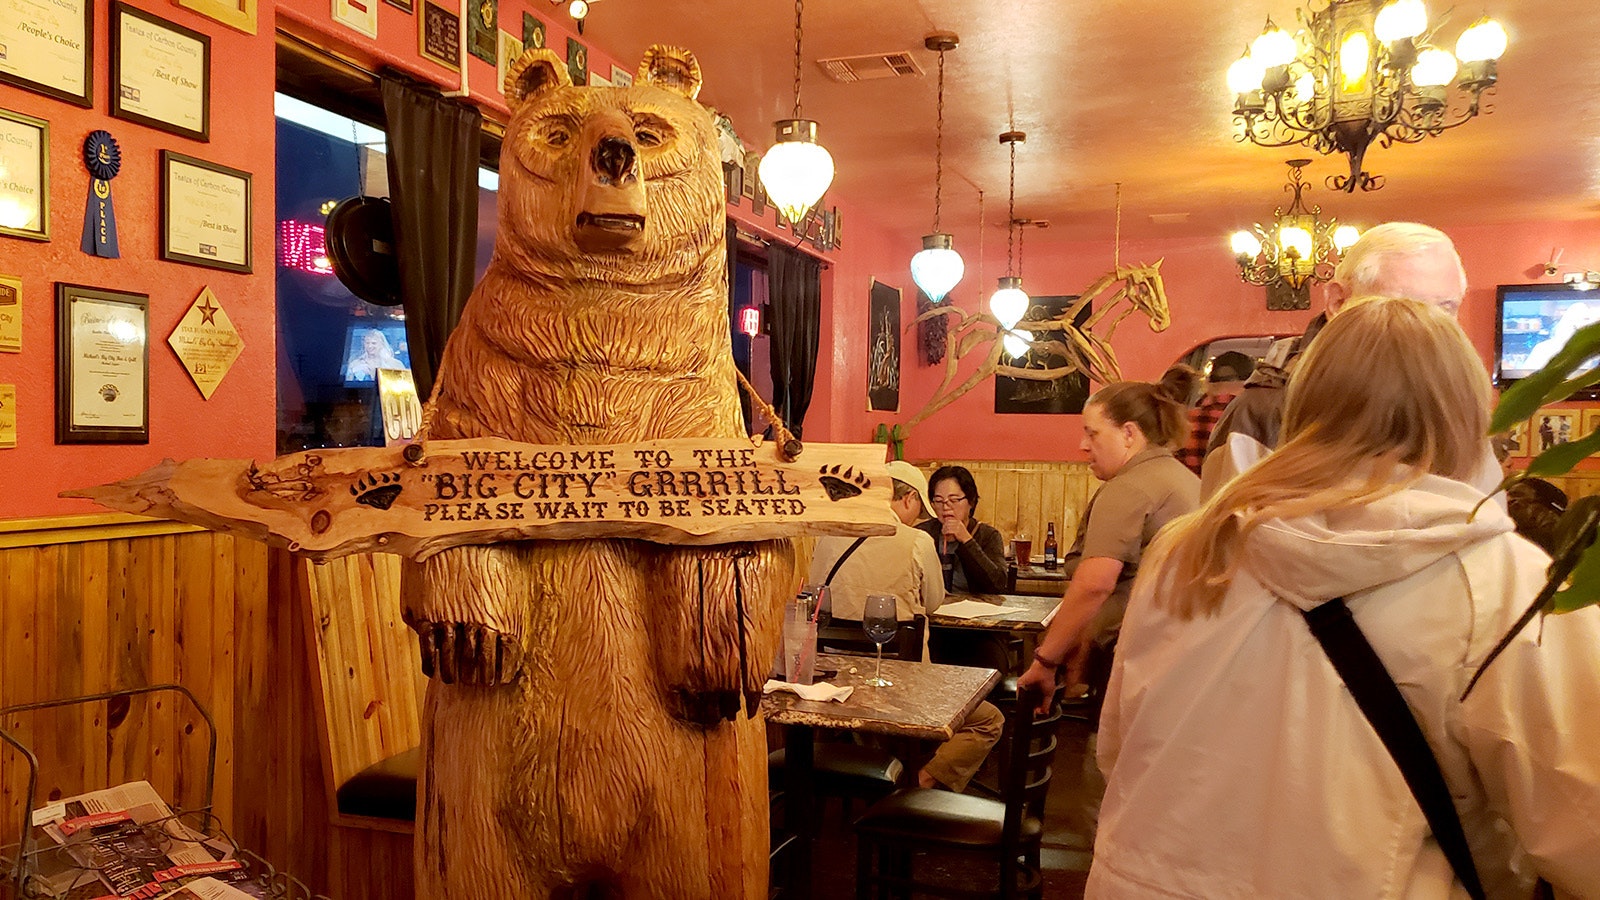 A huge wooden bear welcomes guests to Michael's Big City Steakhouse in Rawlins.